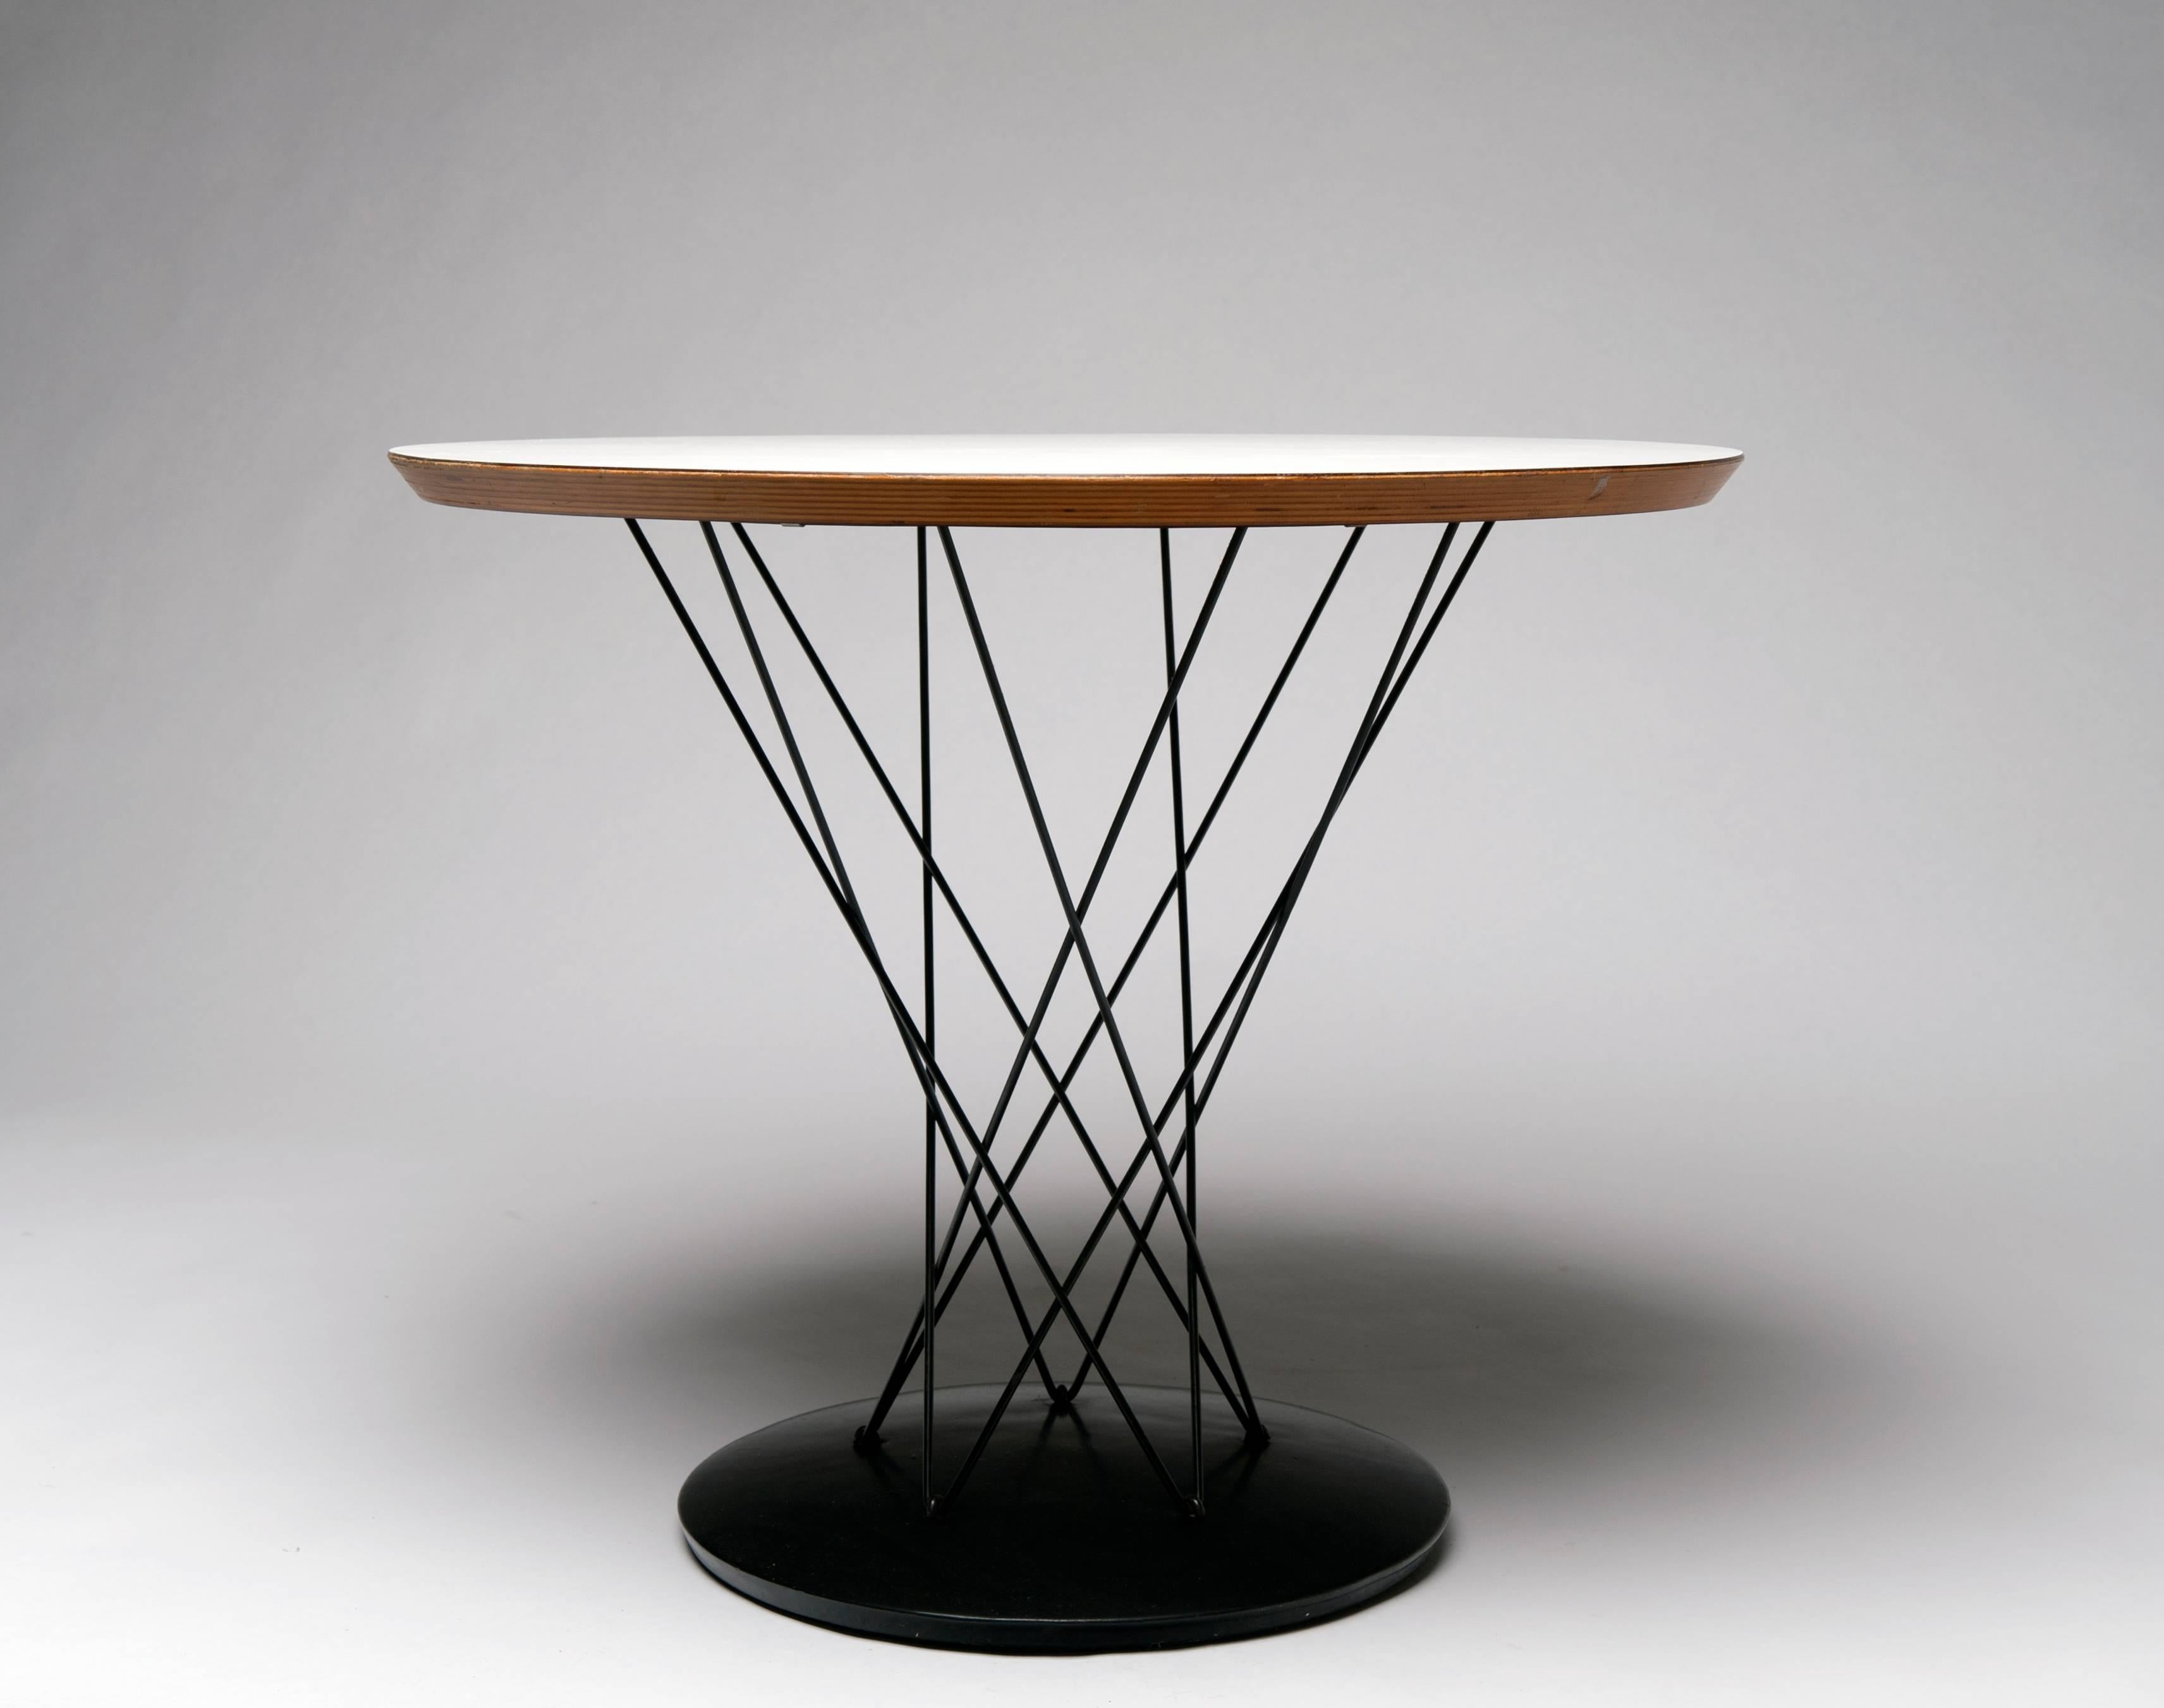 Early vintage table by Isamu Noguchi for Knoll. Originally purchased from Knoll in the 1950s.